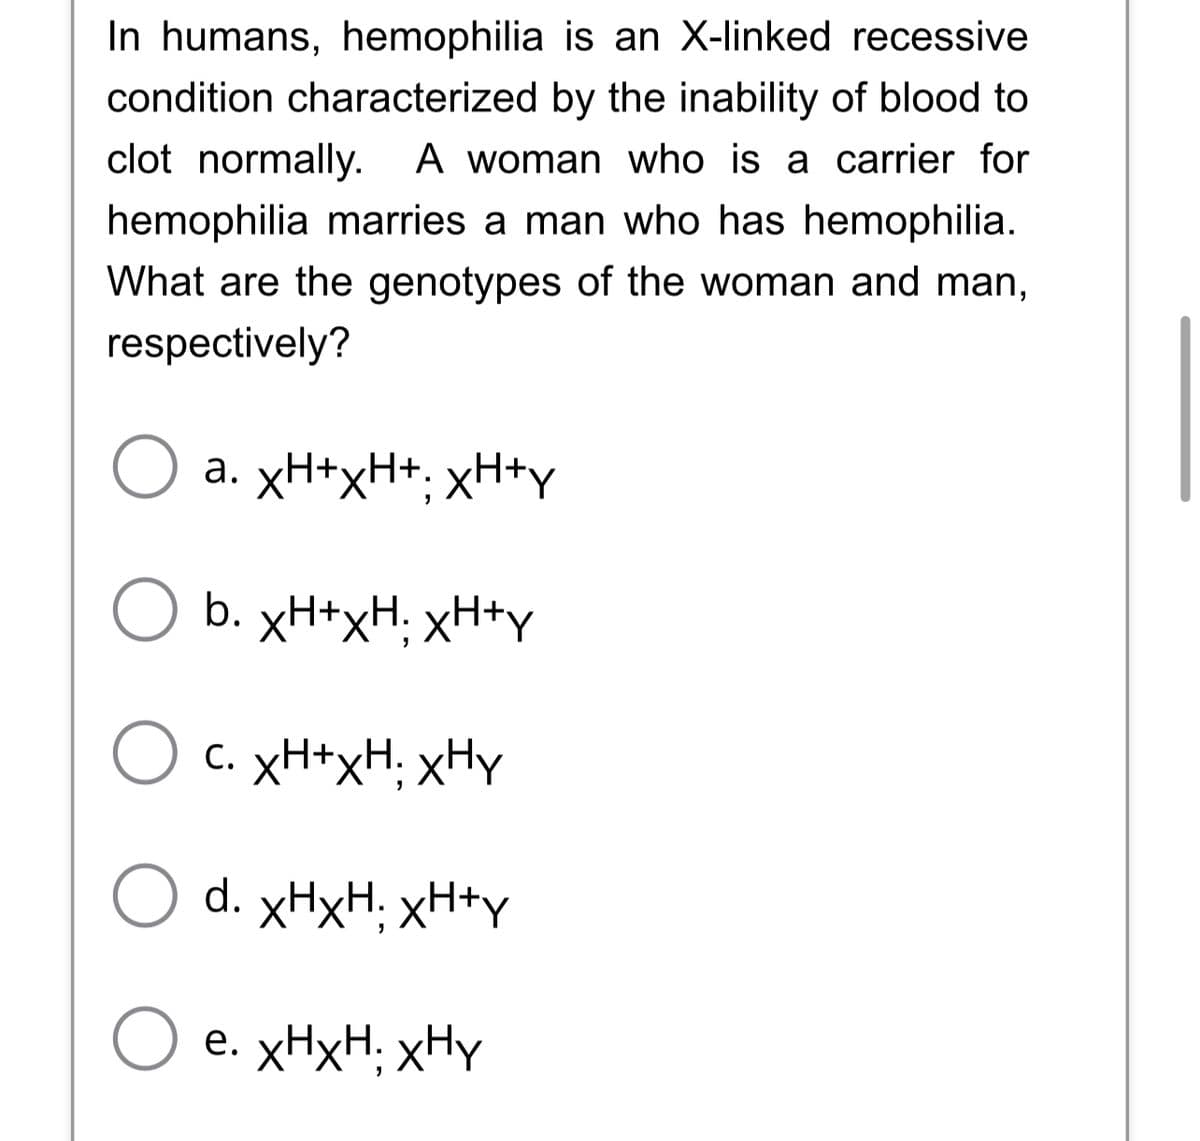 In humans, hemophilia is an X-linked recessive
condition characterized by the inability of blood to
clot normally. A woman who is a carrier for
hemophilia marries a man who has hemophilia.
What are the genotypes of the woman and man,
respectively?
a. xH+xH+, xH+y
b. xH+xH xH+y
c. xH+xH xHy
Od. XHXH, XH+y
O e. xHxH xHy